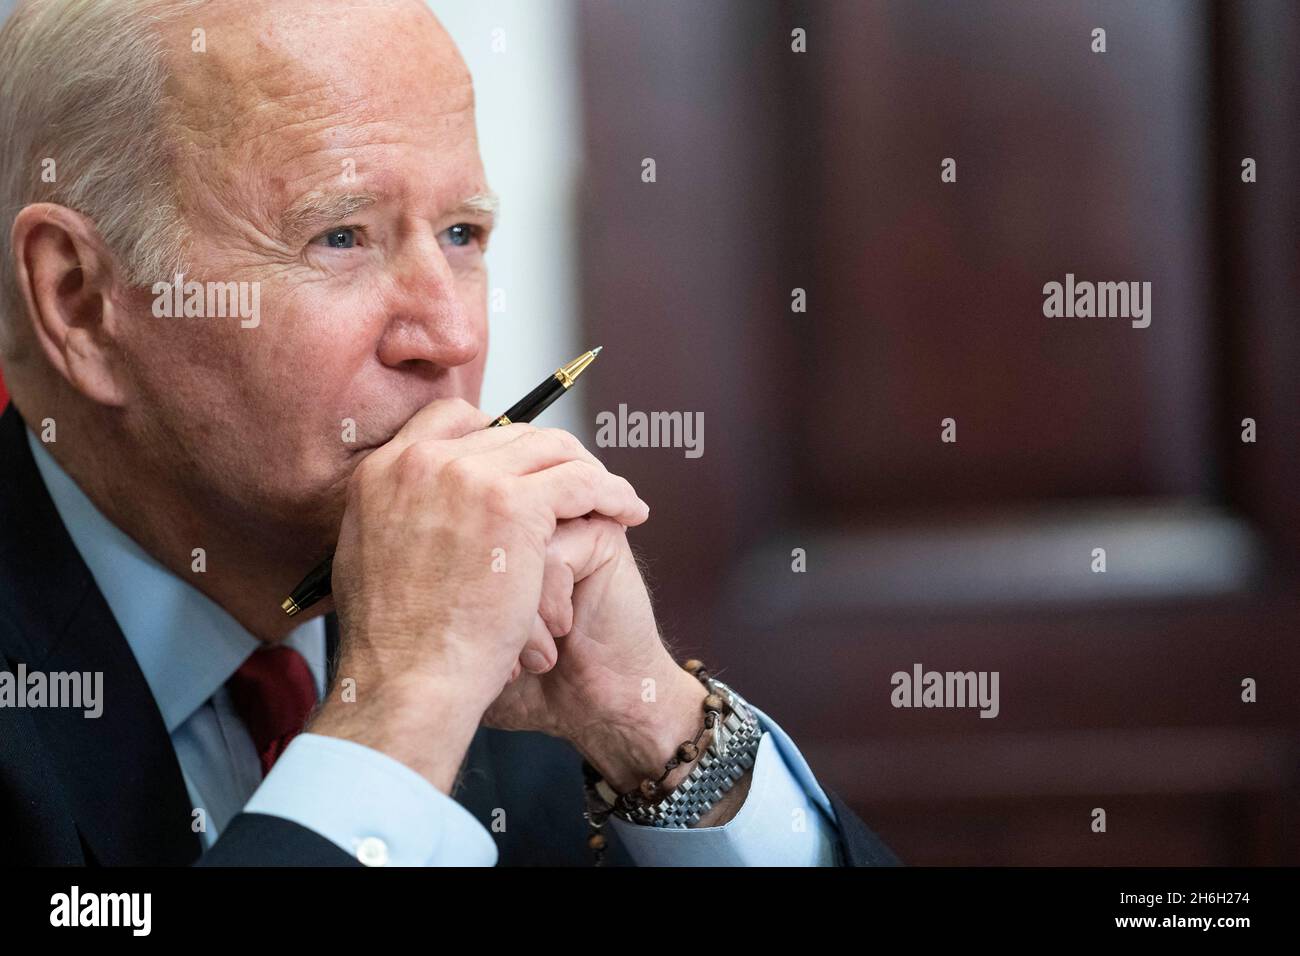 President Joe Biden listens during a virtual summit with Chinese President Xi Jinping in the Roosevelt Room of the White House in Washington DC on Monday, November 15, 2021. Photo by Sarah Silbiger/Pool/ABACAPRESS.COM Stock Photo